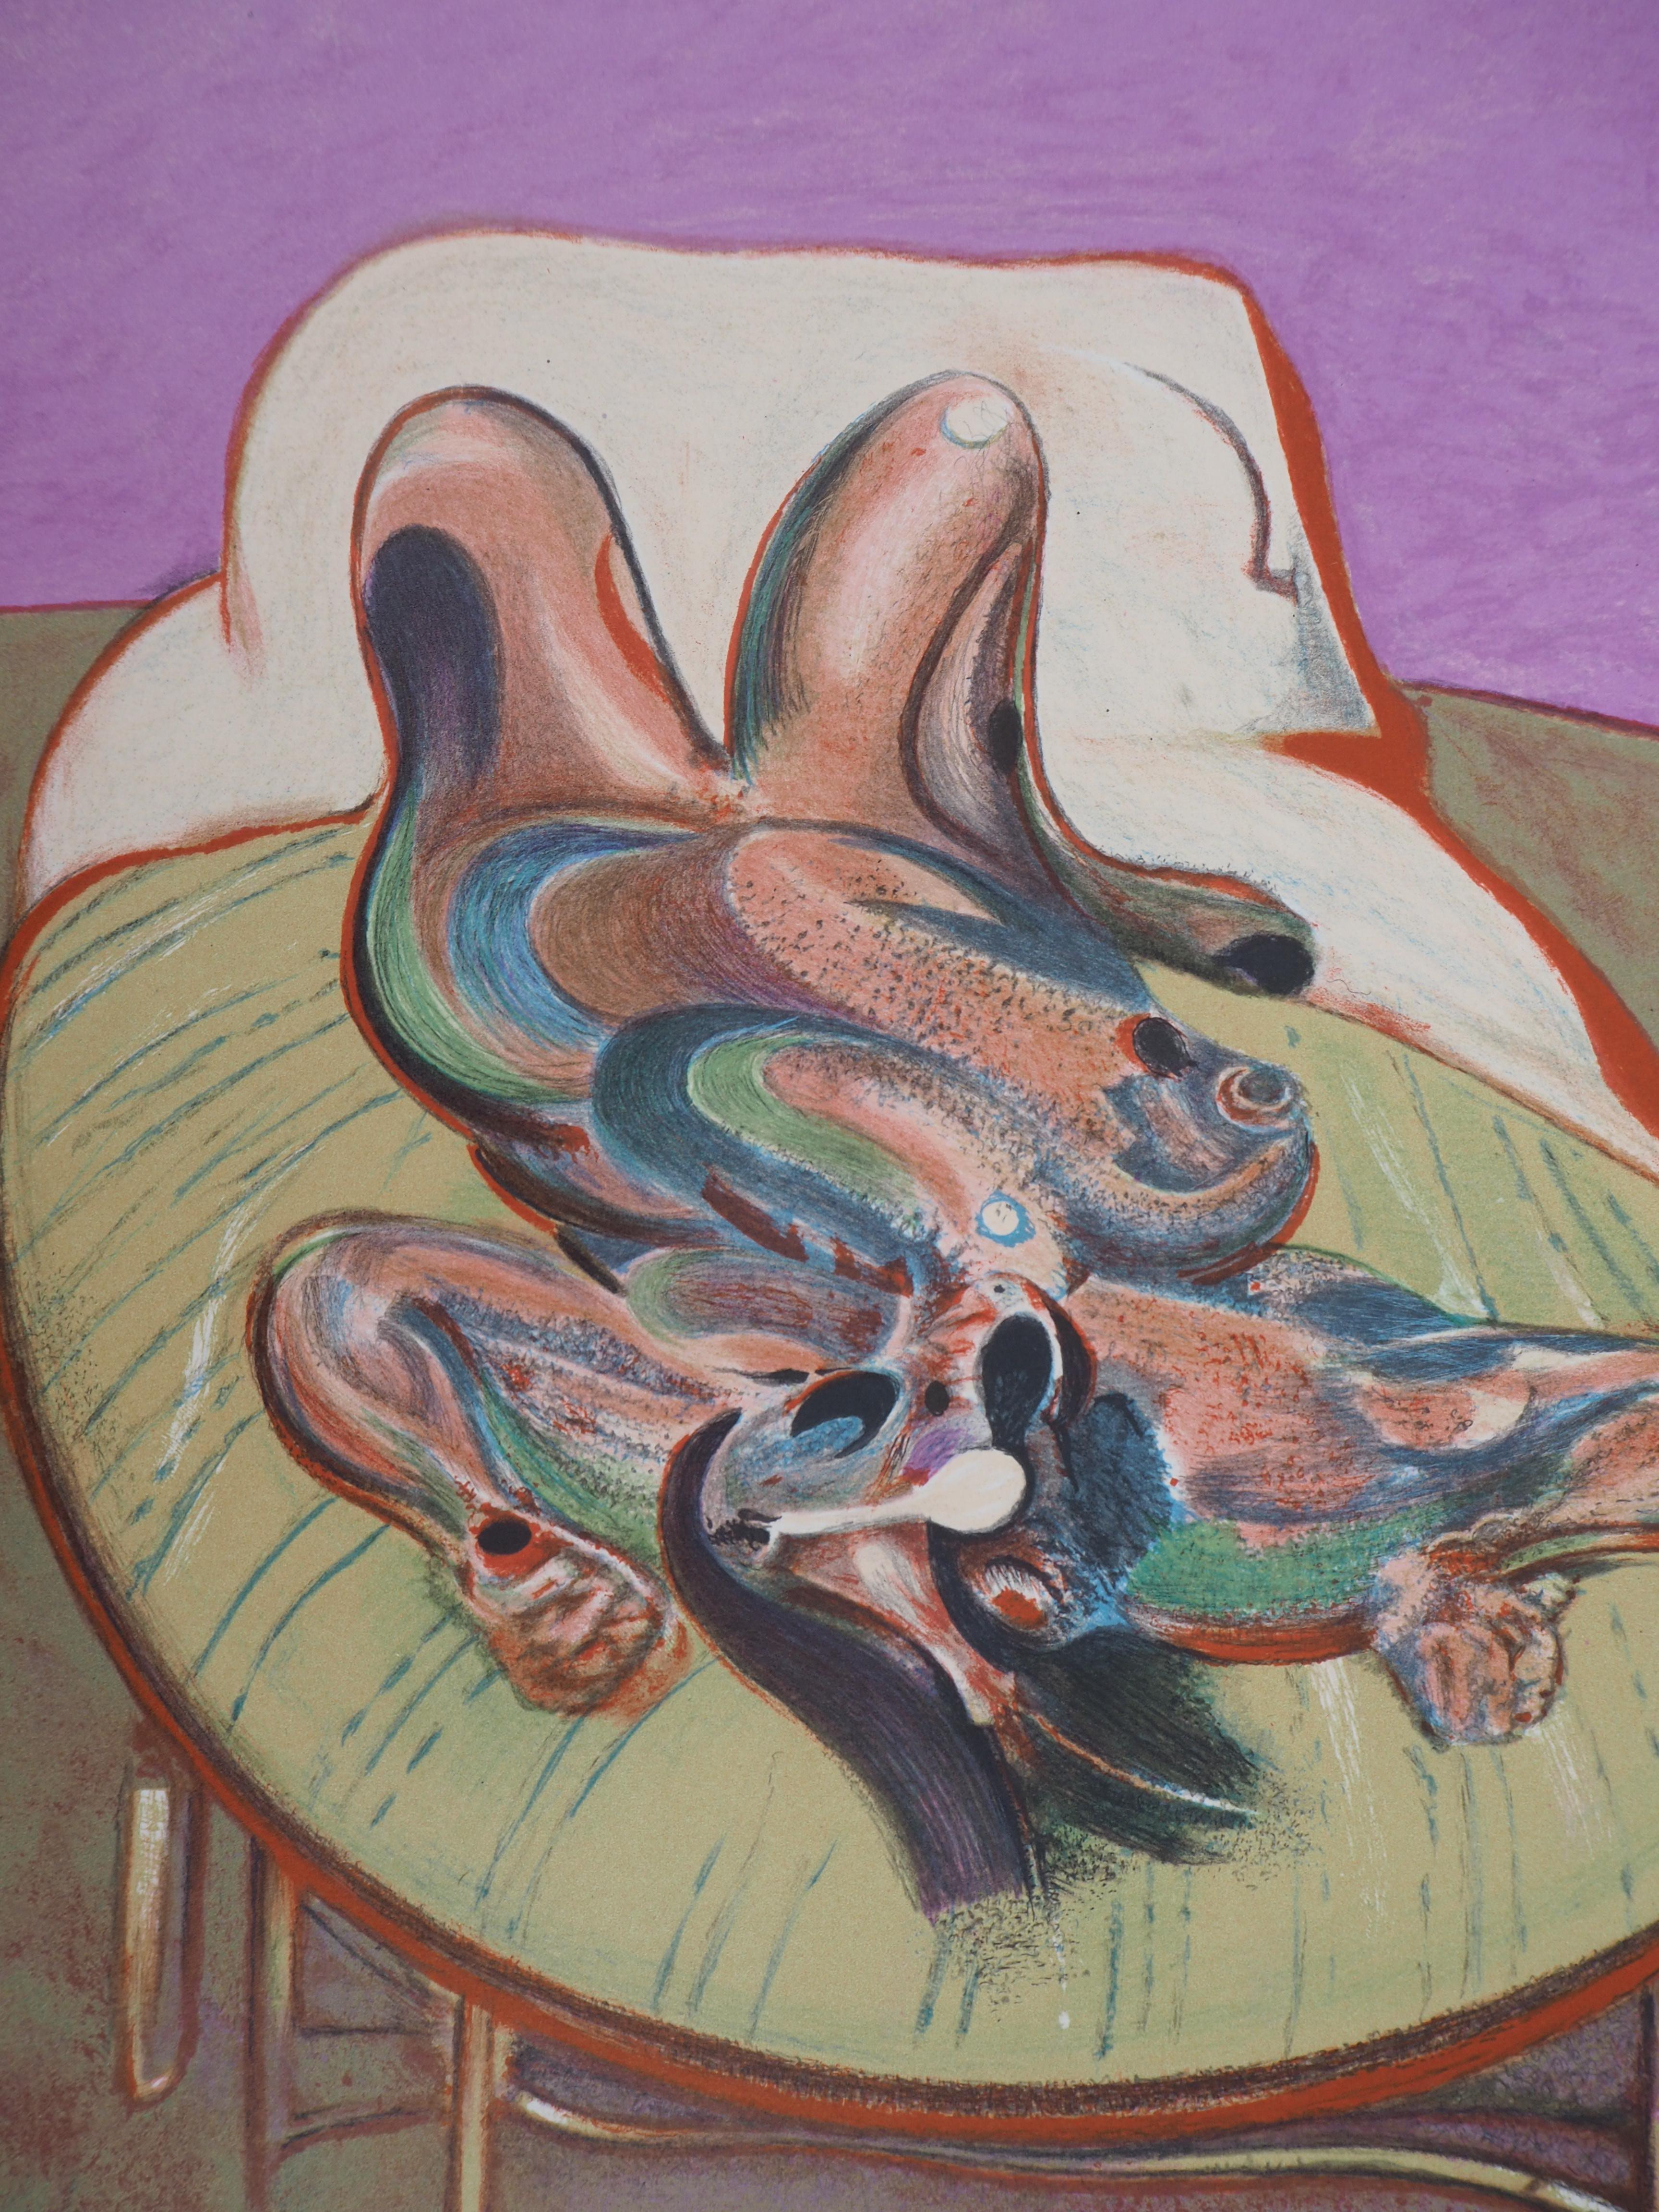 Lying Woman - Original vintage lithograph poster, Maeght 1966 - Modern Print by Francis Bacon